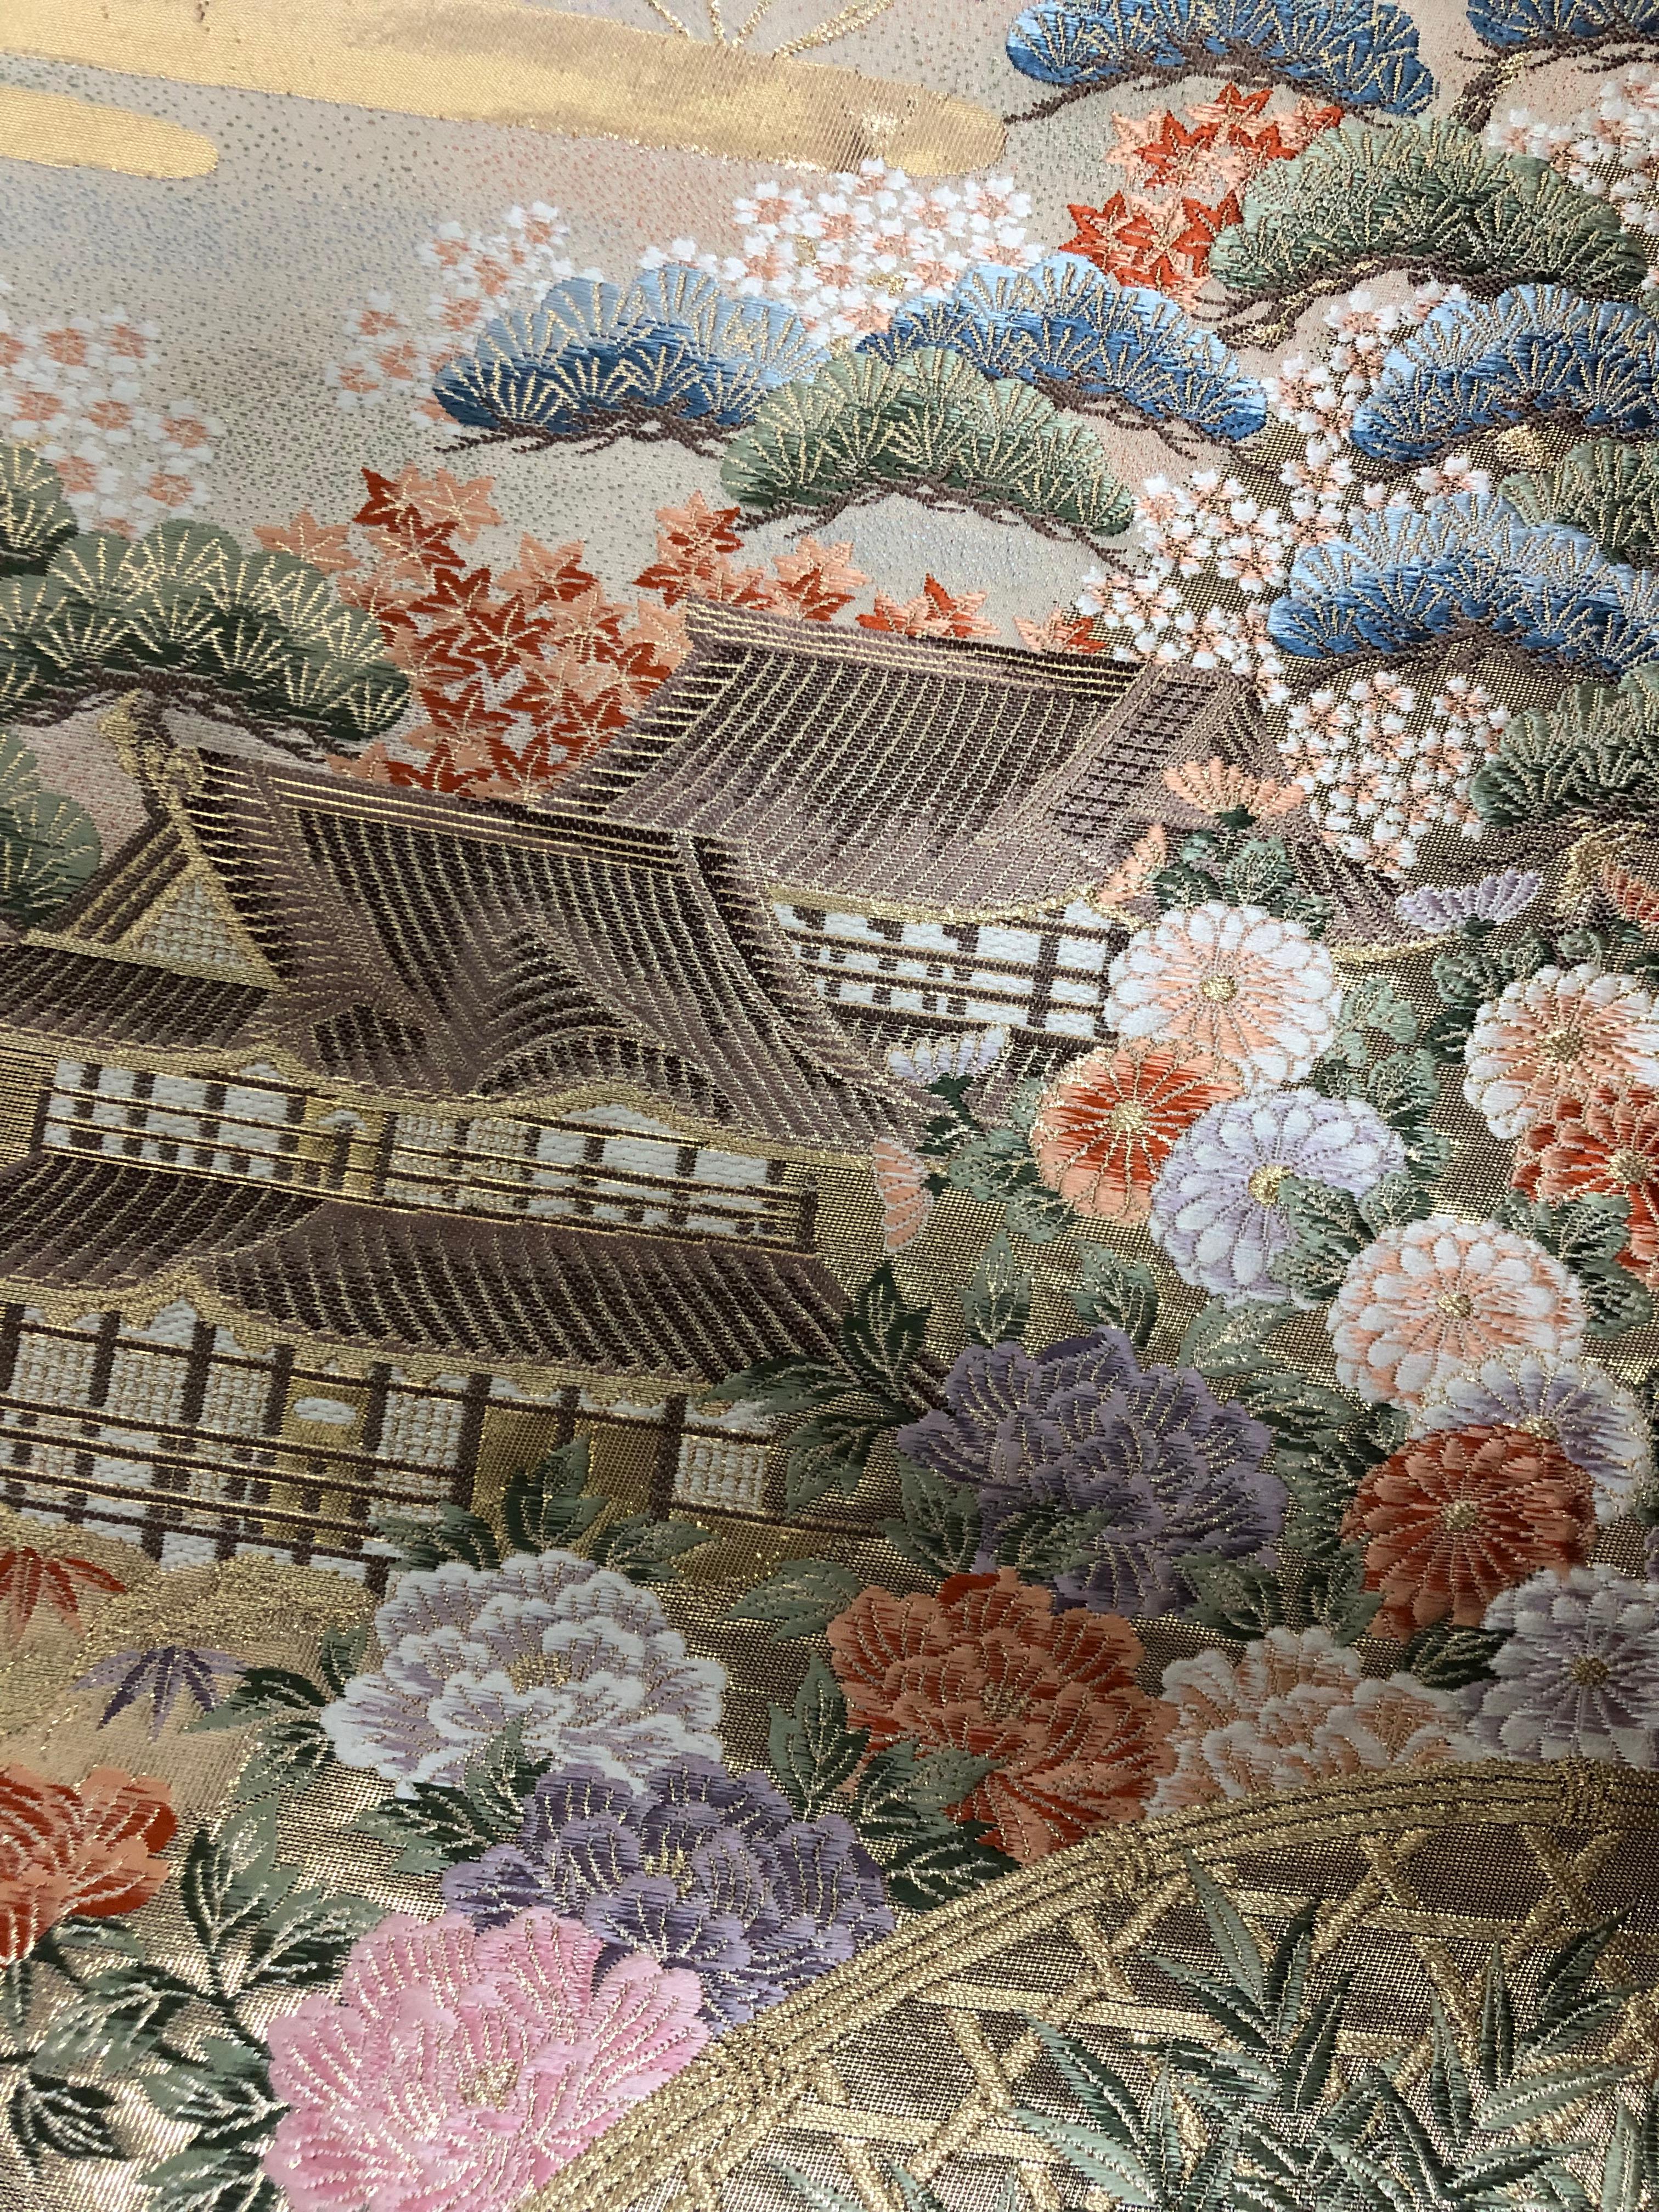 Contemporary Kimono Art / Japanese Art / Wall Decoration -Temple Garden in a Riot of Blooms- For Sale